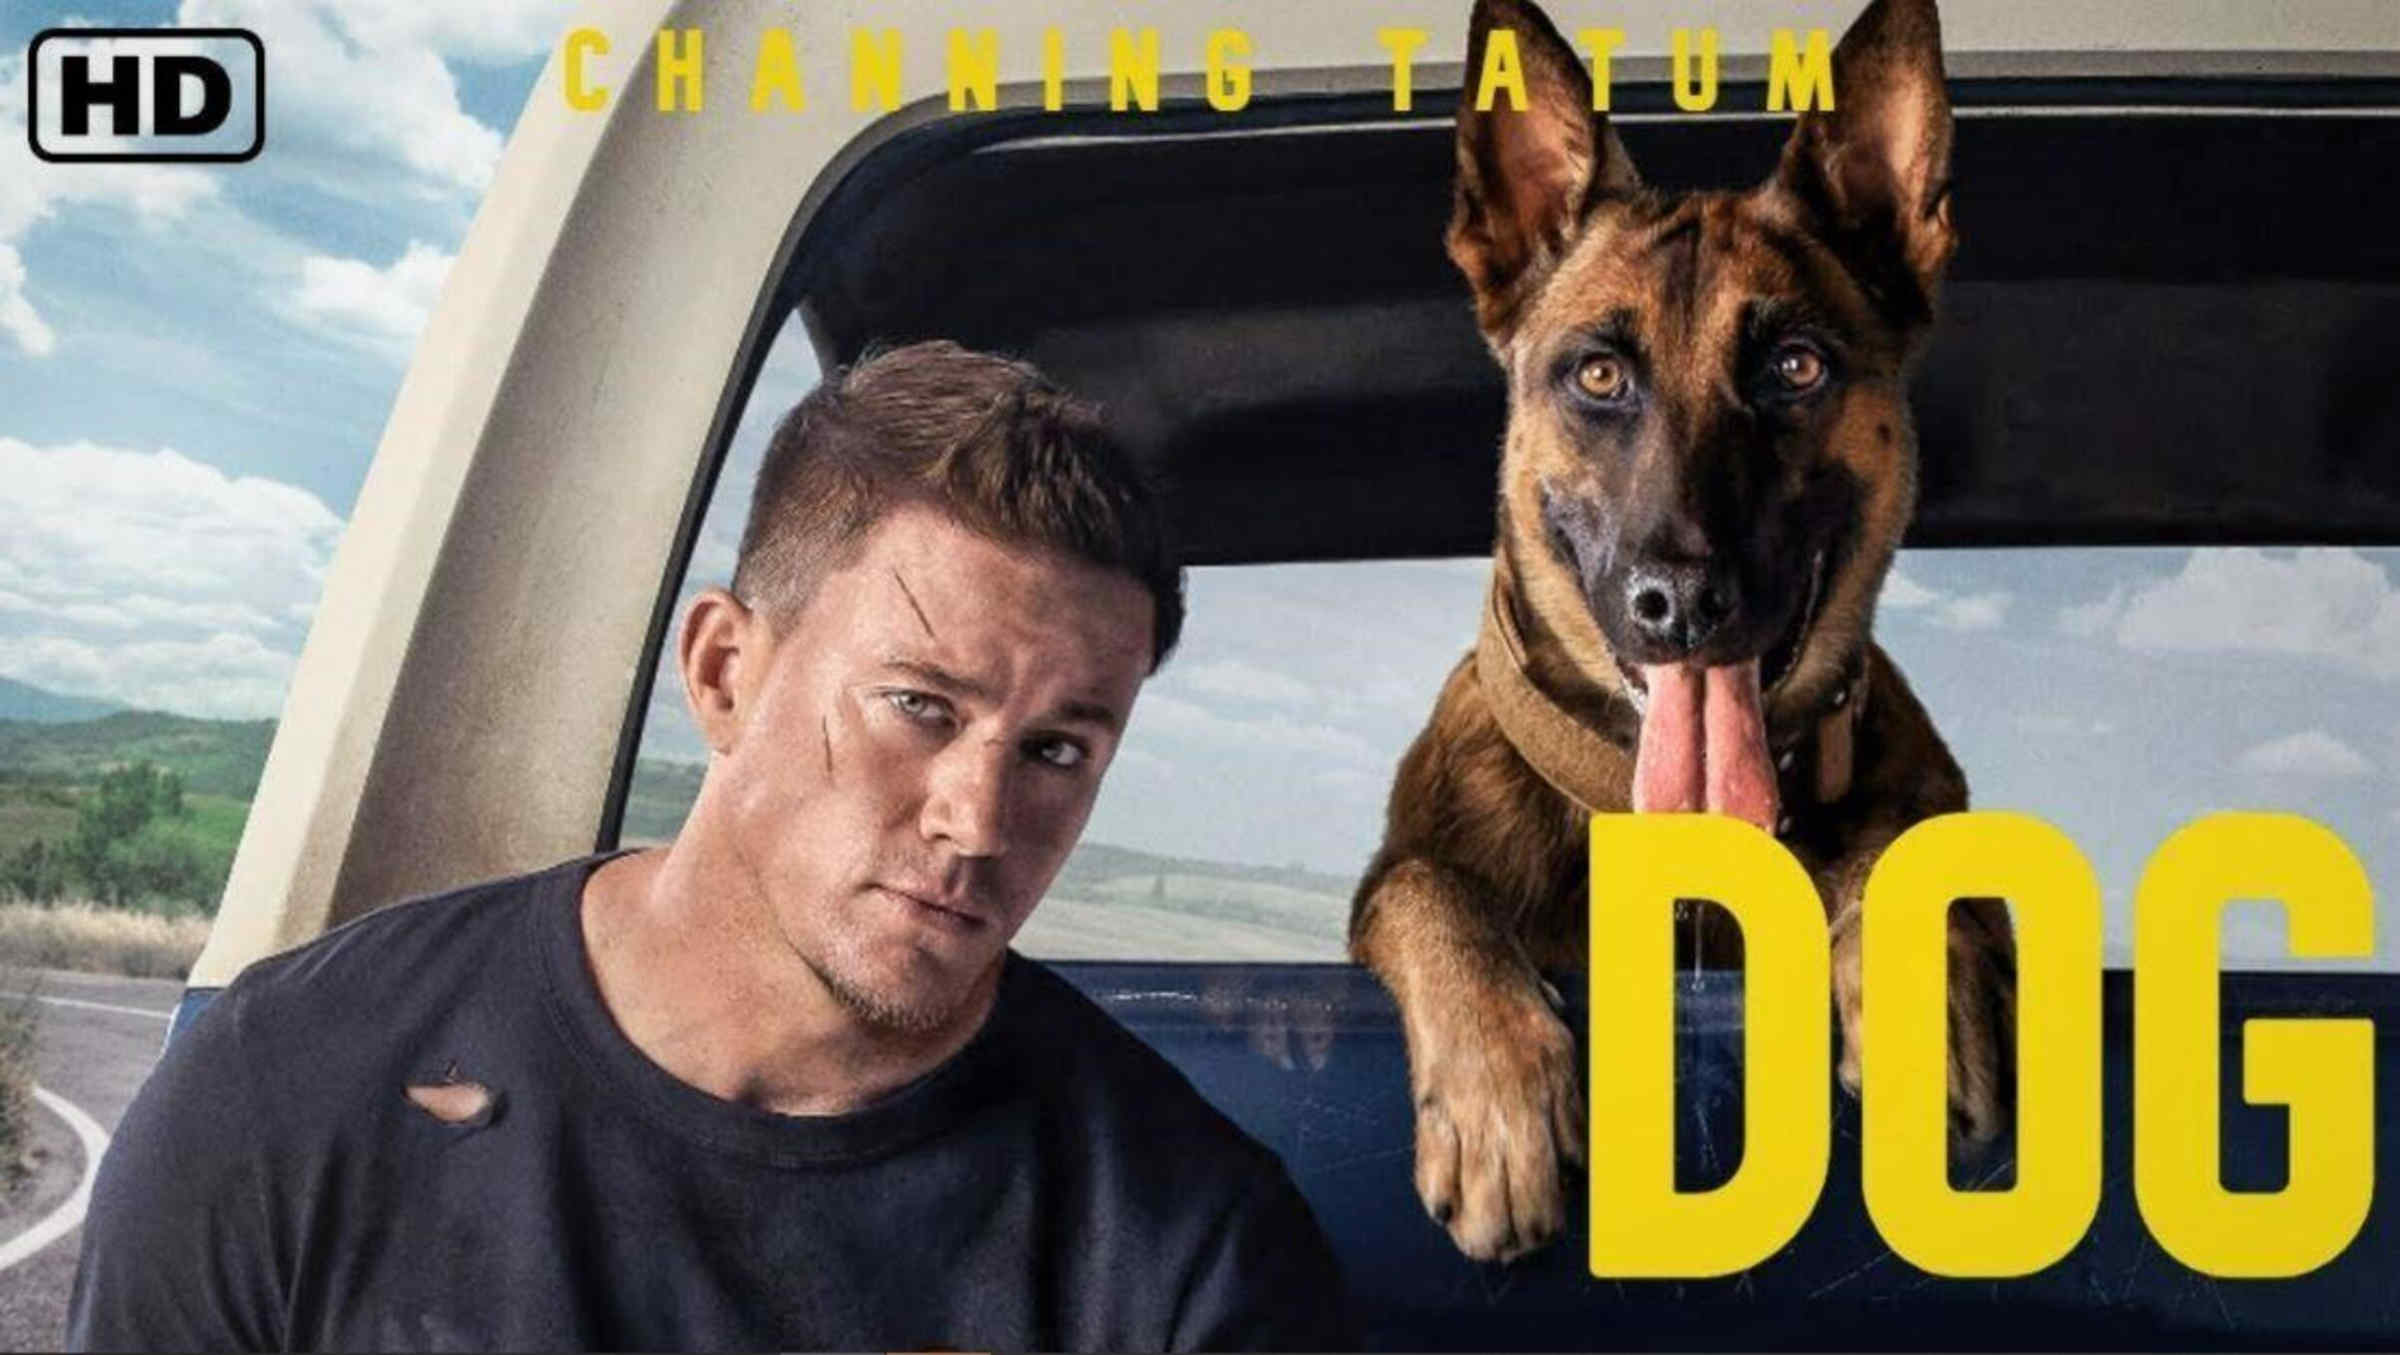 Watch ‘Dog’ (2022) Free online streaming At home – Film Daily